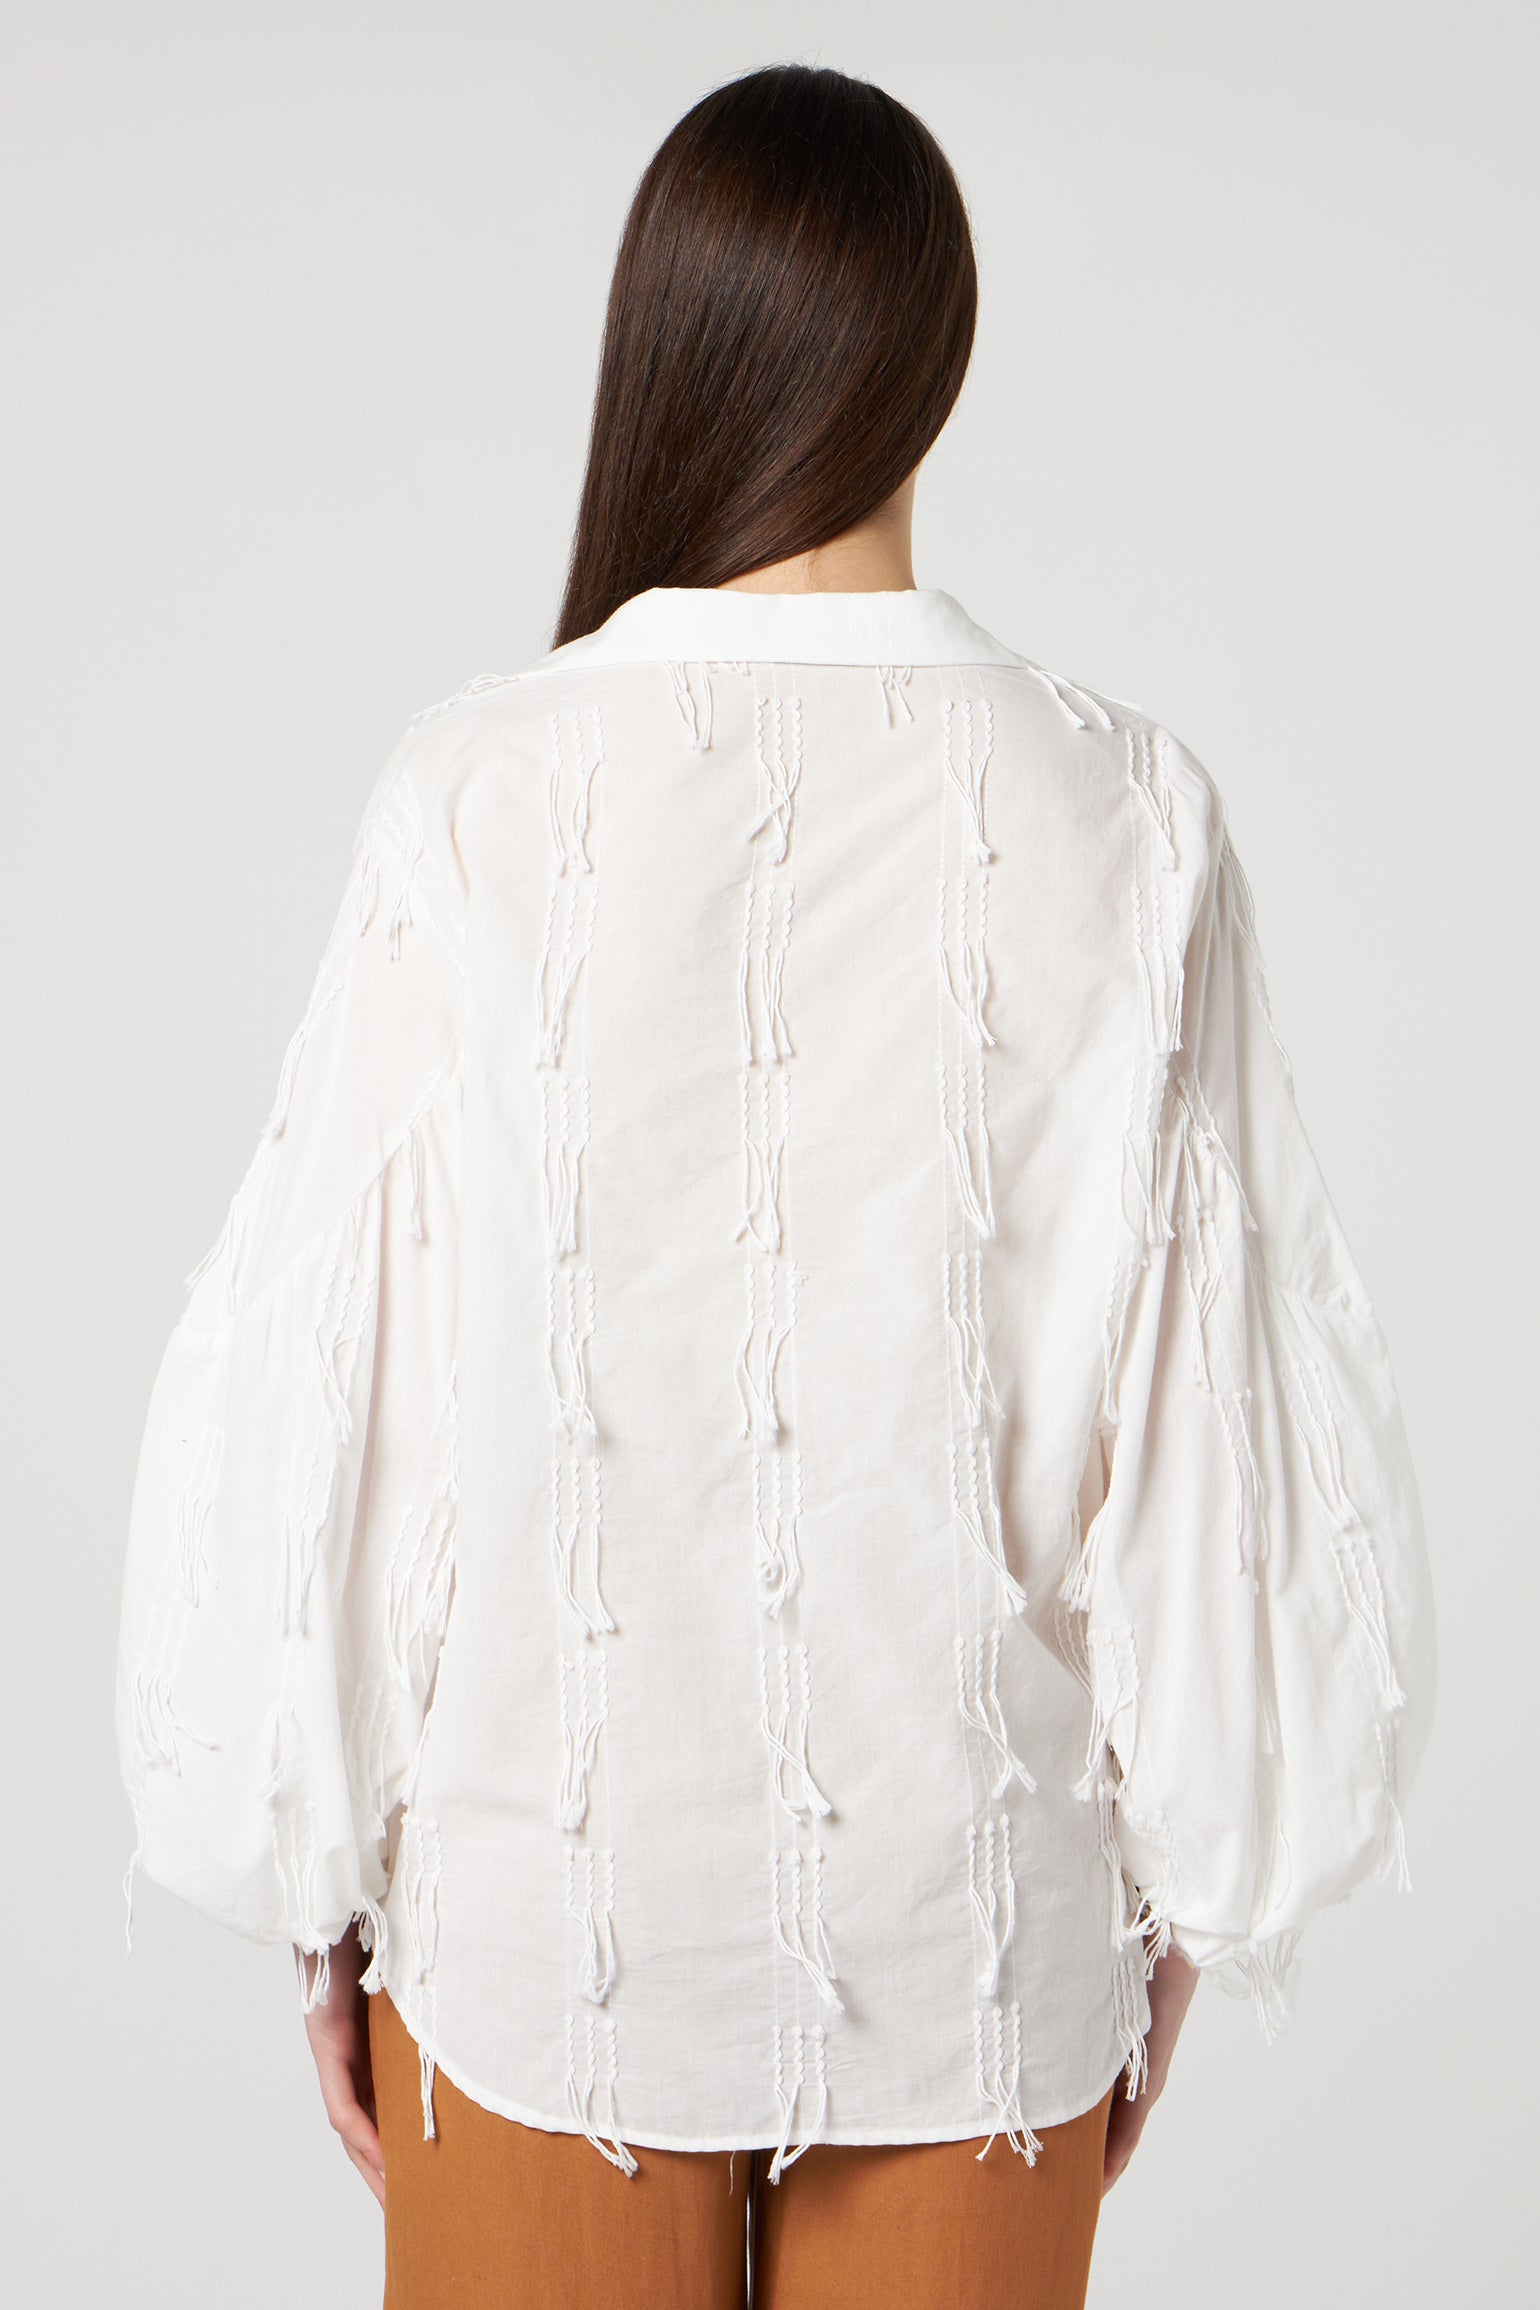 JIJIL White Blouse with Embroideries